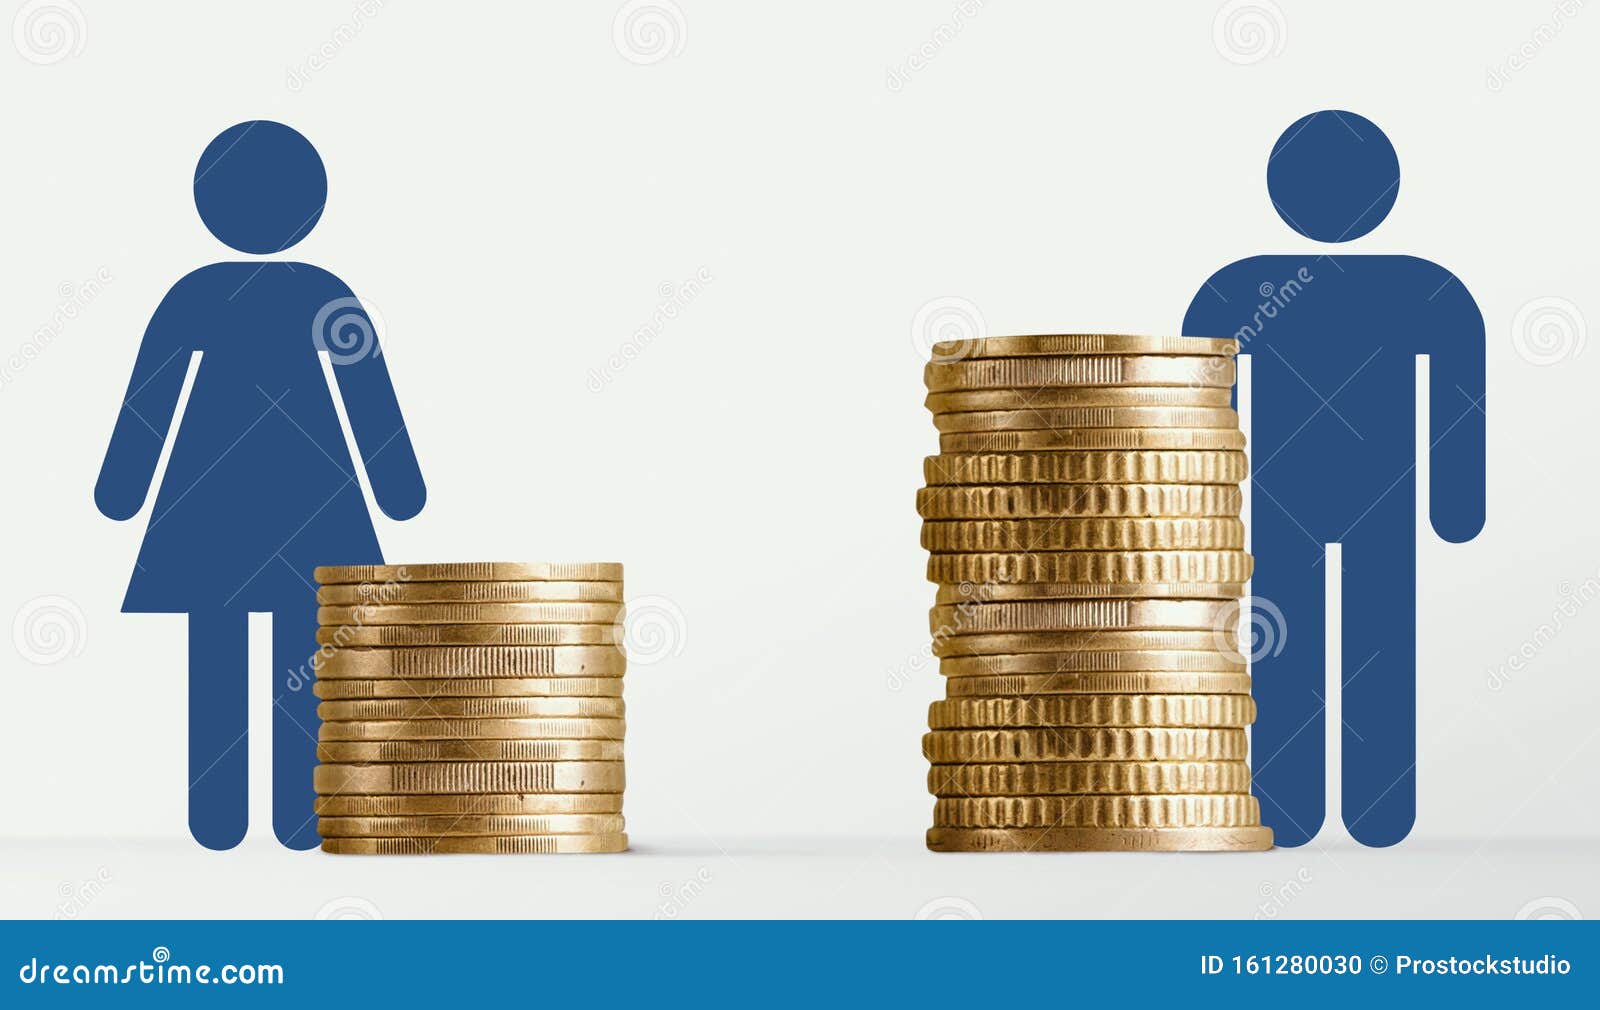 gender pay gap, male and female signs near different stacks of coins